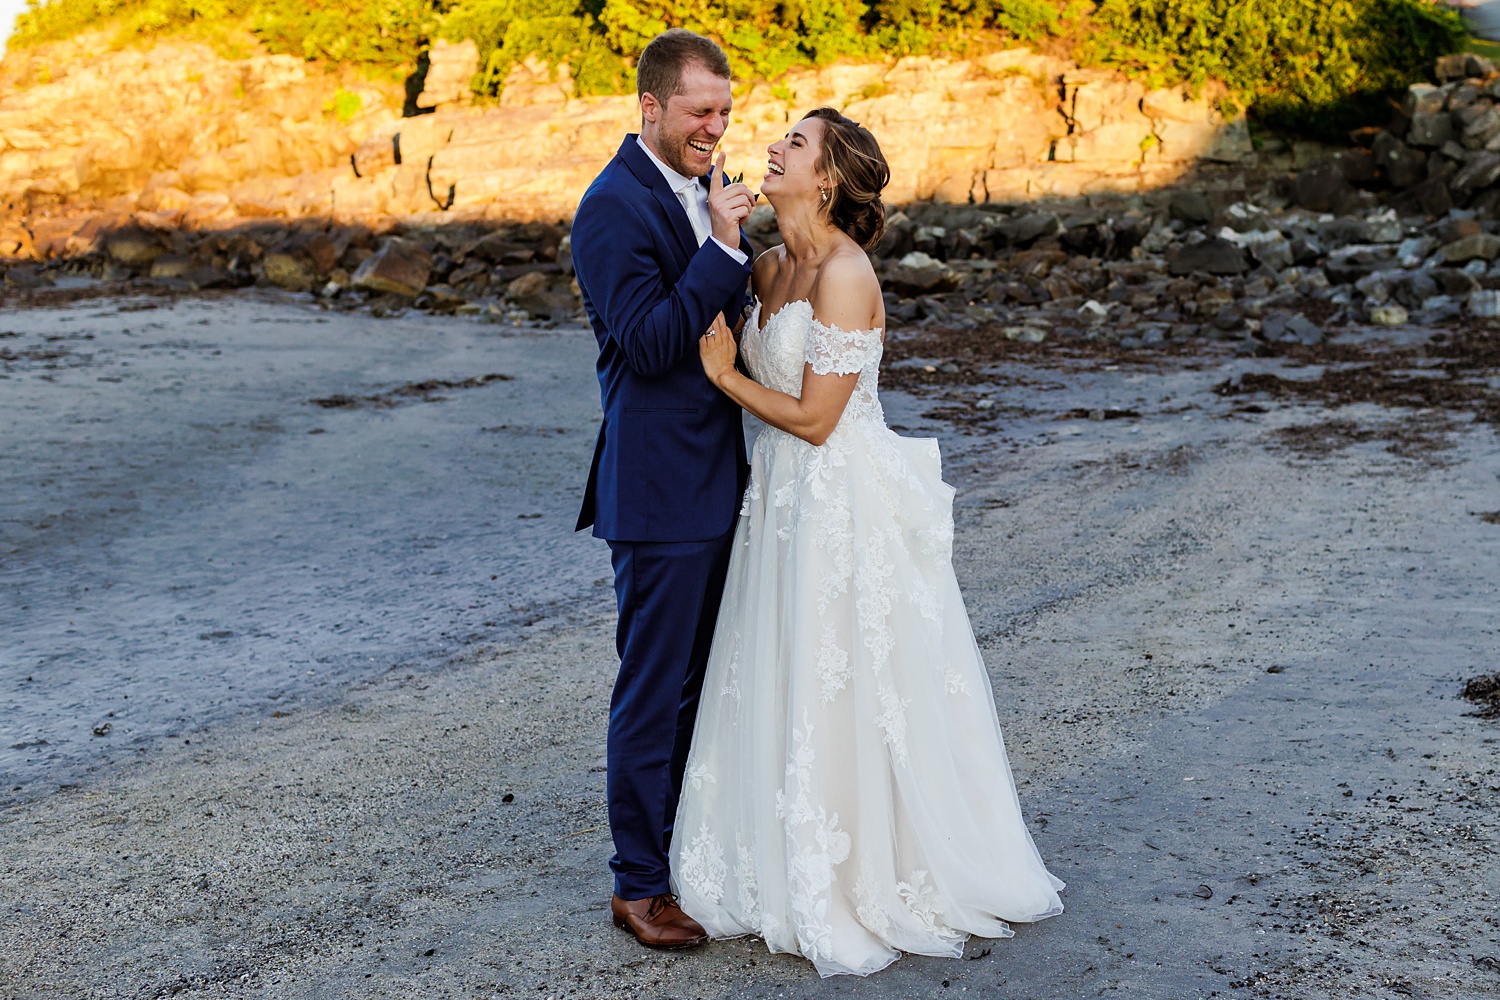 The bride and groom can't stop the laughter and happiness on their wedding day in Maine